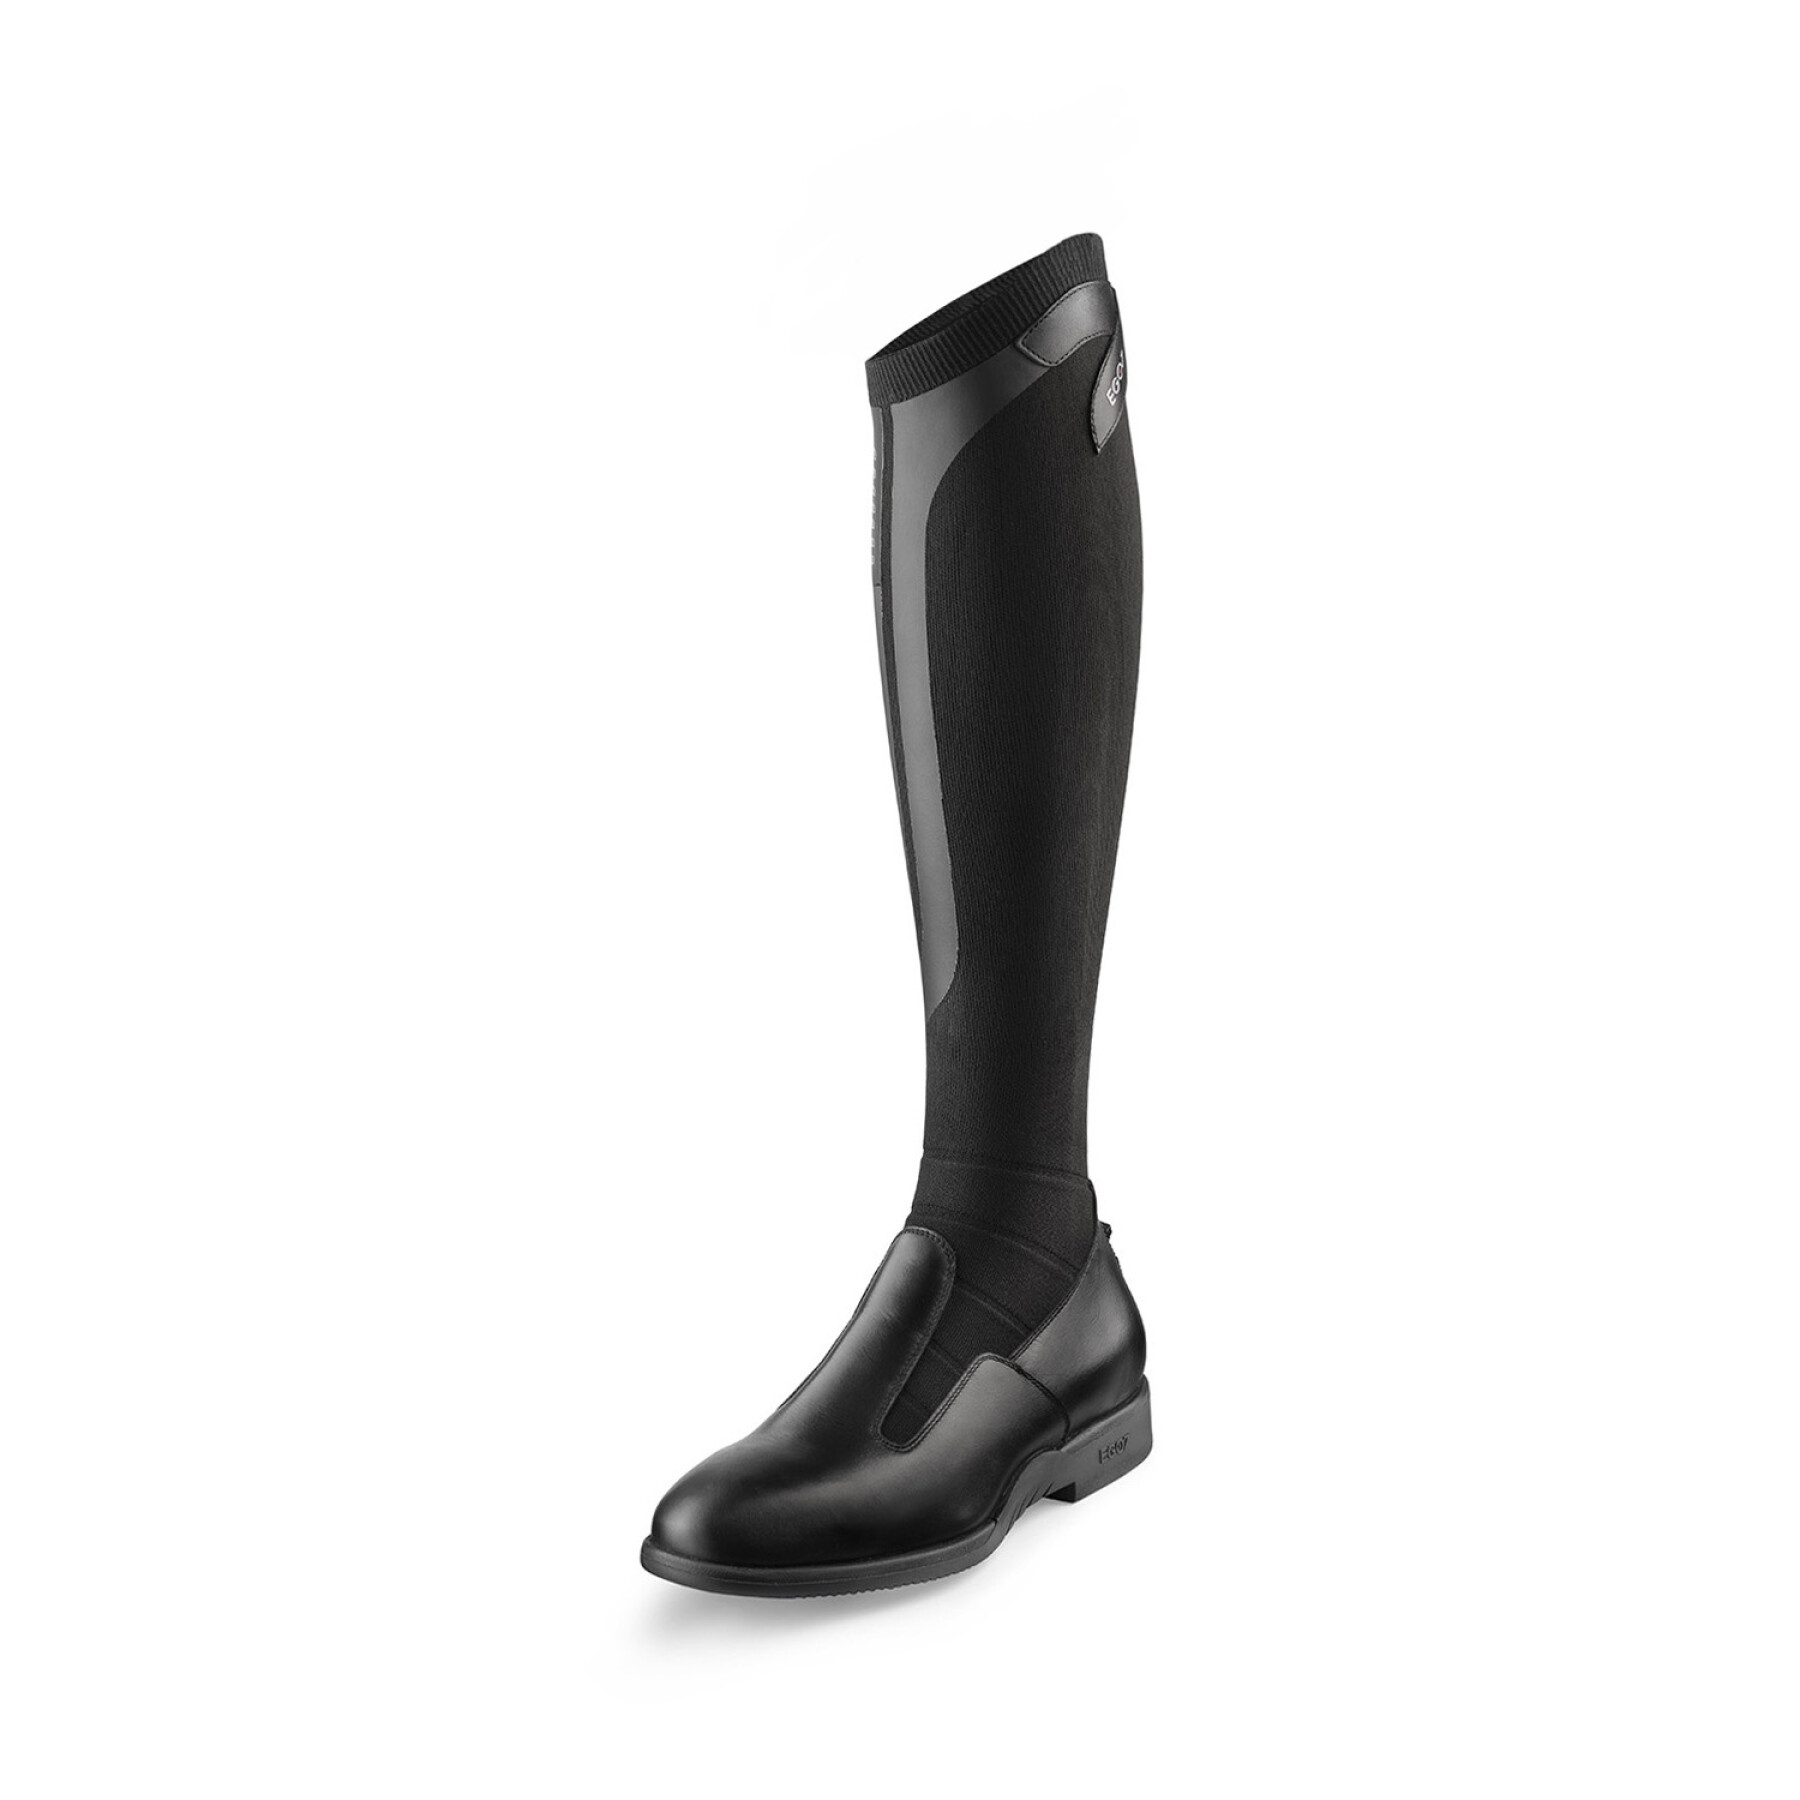 Riding boots Ego 7 Contact